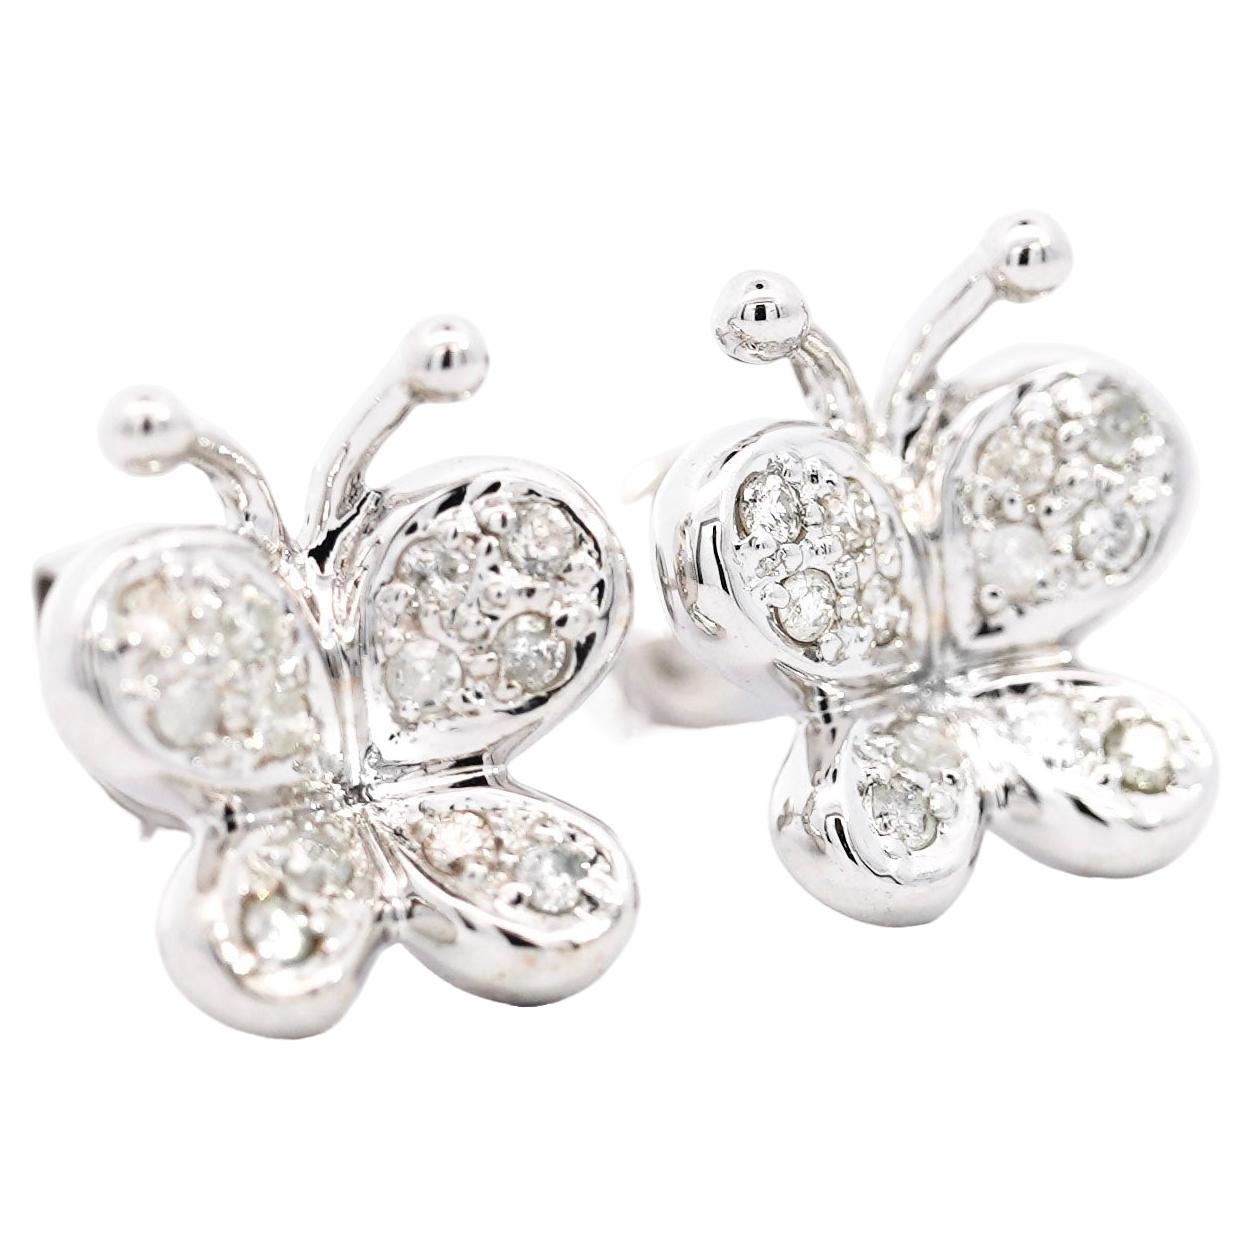 14K Solid White Gold Mounts Natural Diamond Butterfly Stud Earrings.

Fixed with push-back closure and a smooth polished finish. Cute, dainty, and full of class. These stud earrings are the ideal gift for animal lovers in search of something that's